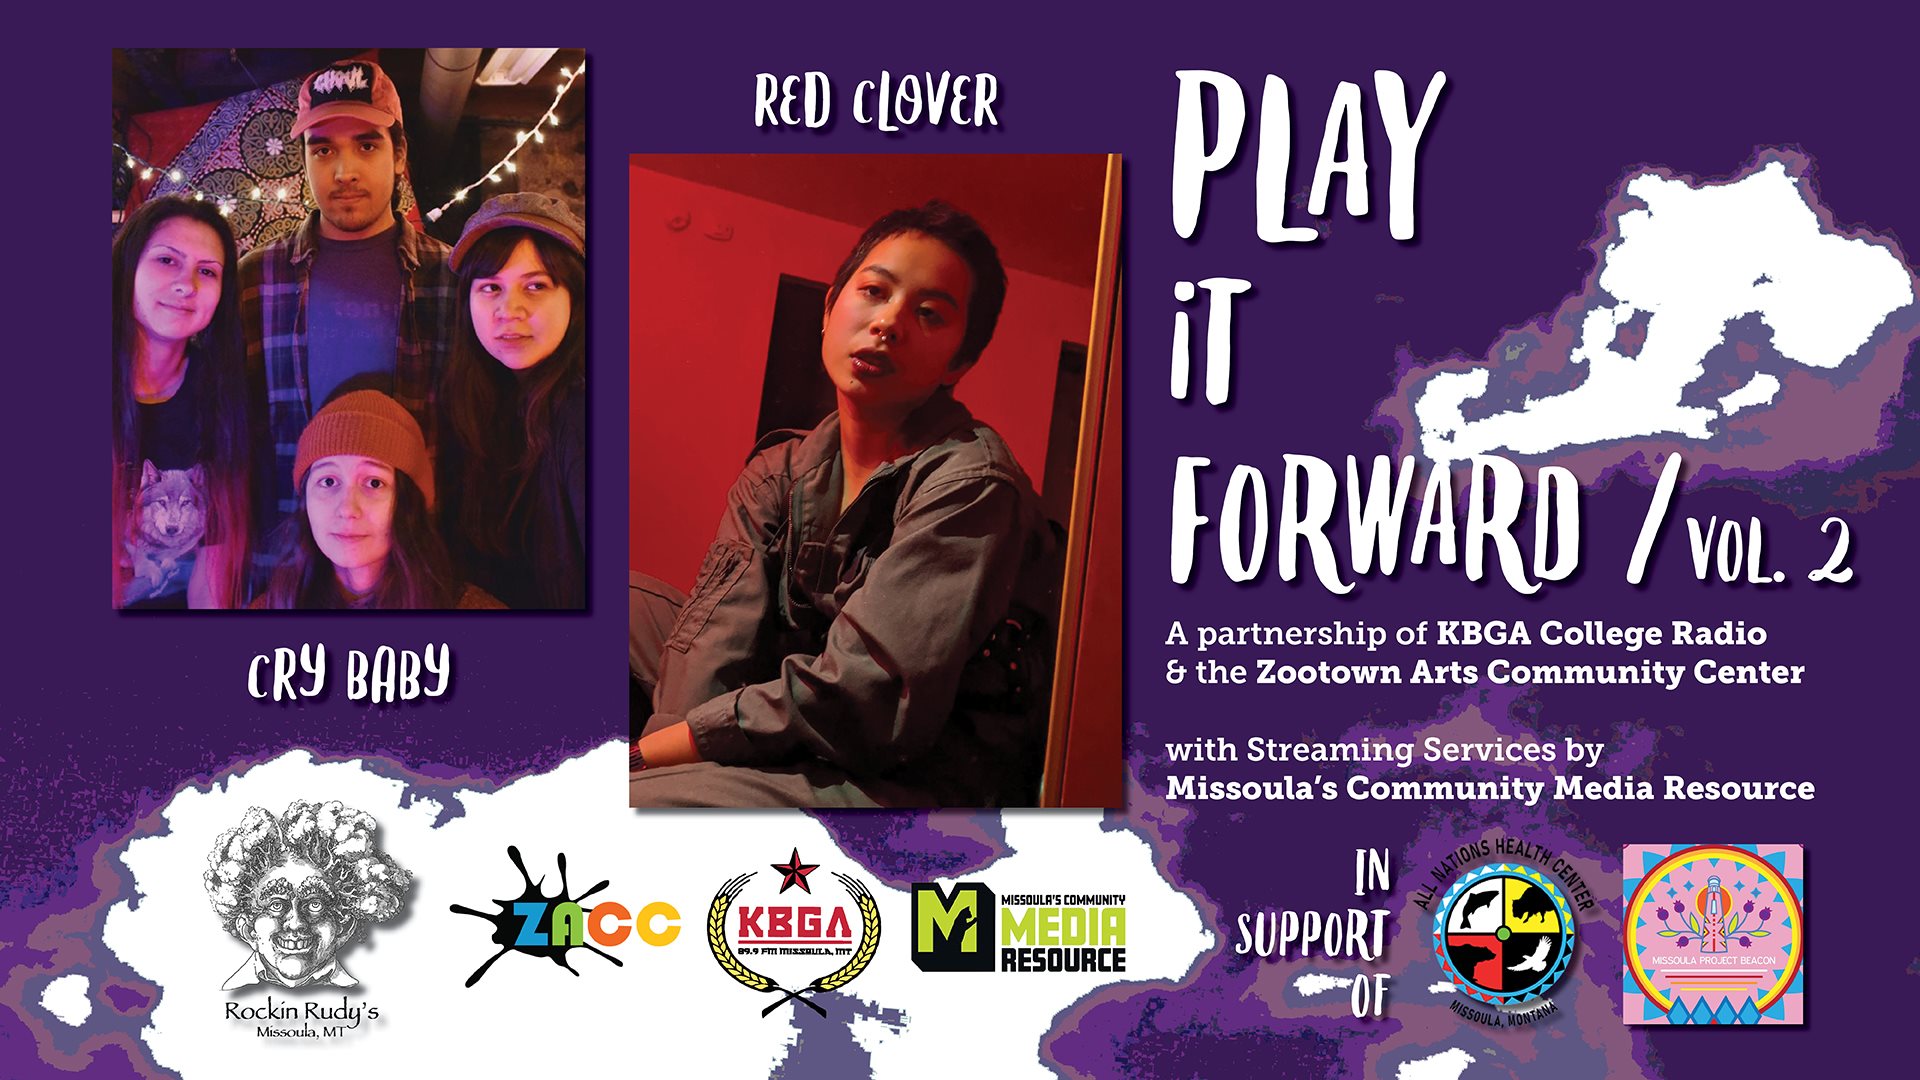 Play It Forward: Cry Baby & Red Clover for Missoula Project Beacon